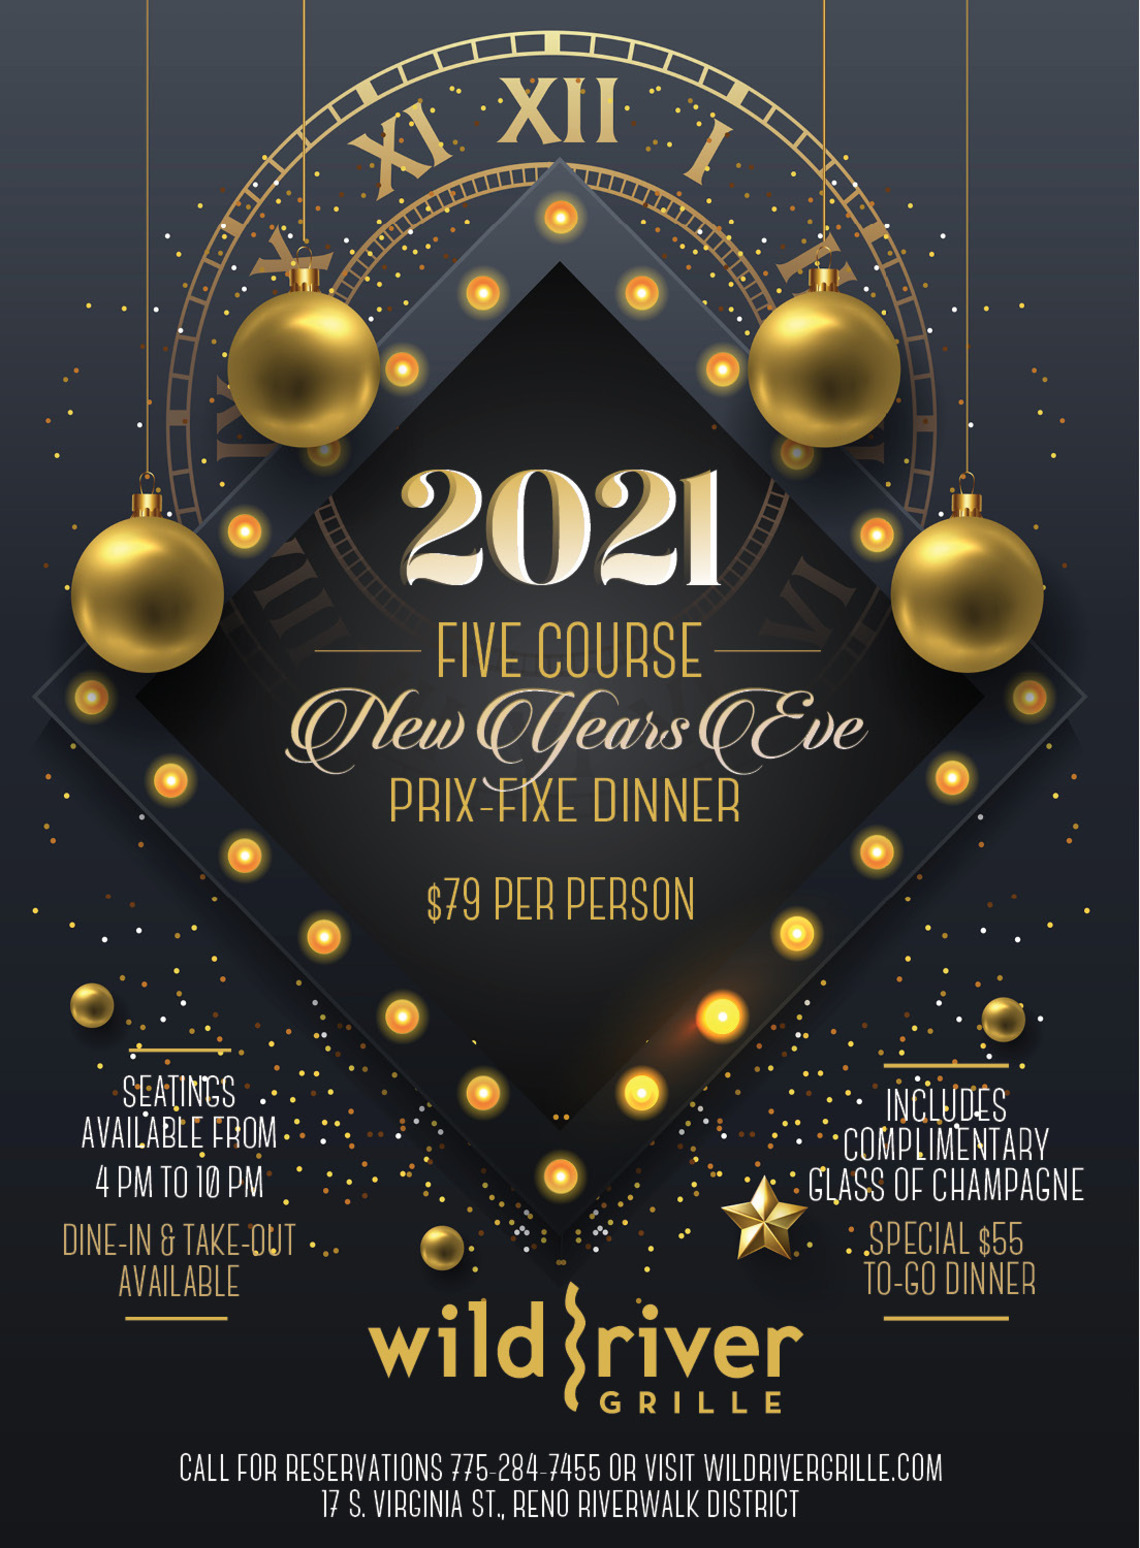 Wild River Grille Rings in 2021 with a Decadent 5-Course Meal